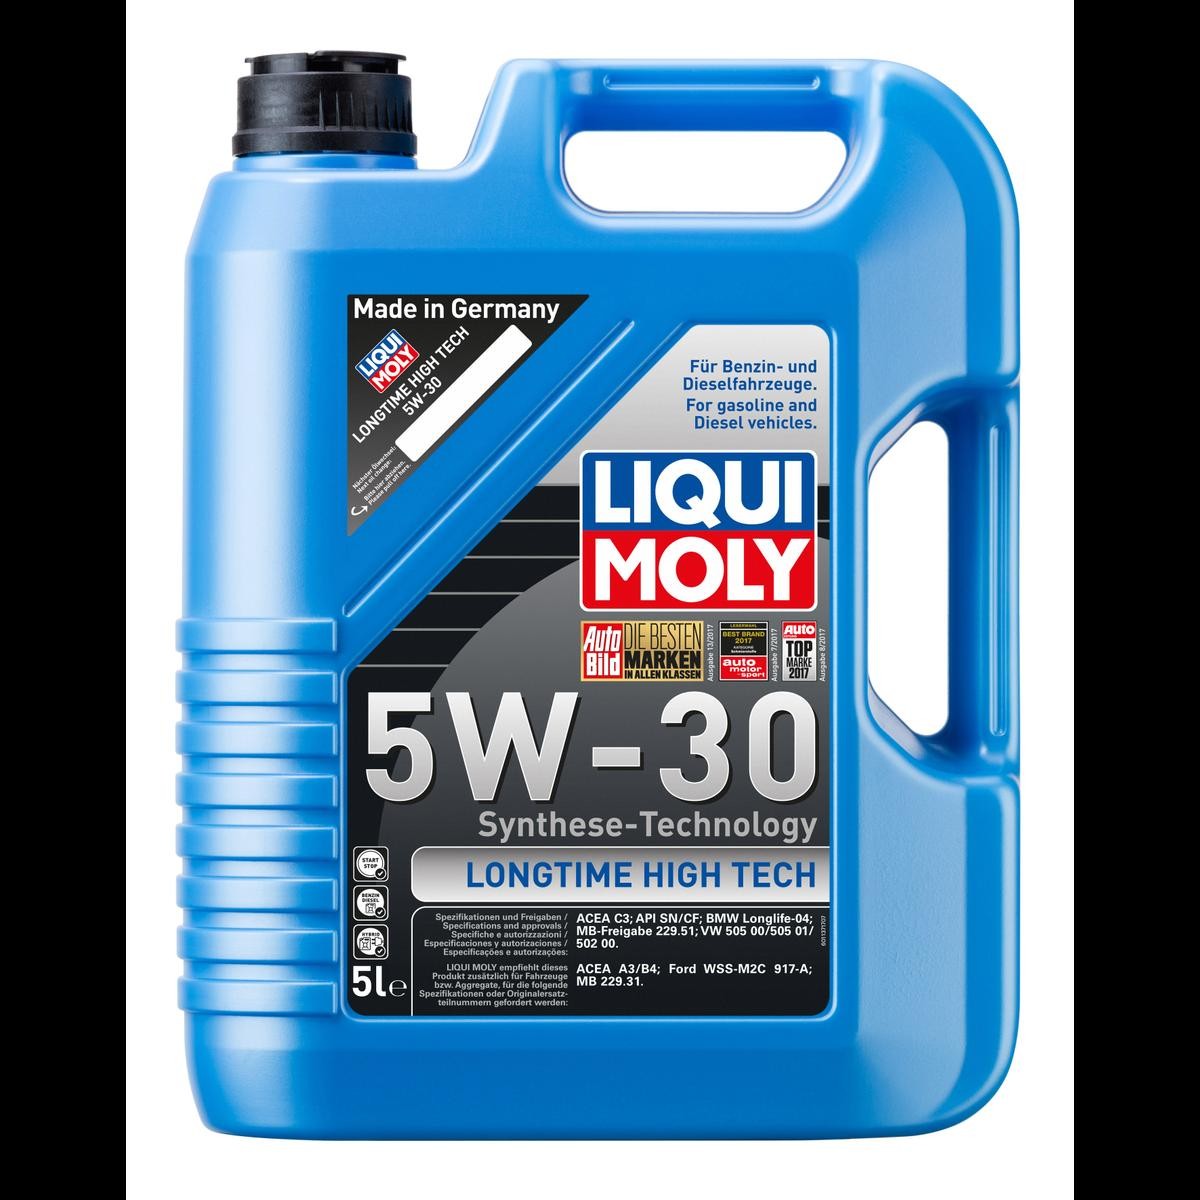 Engine oil LIQUI MOLY Longtime High Tech 5W-30 5l, 1137 ❱❱❱ price and  experience